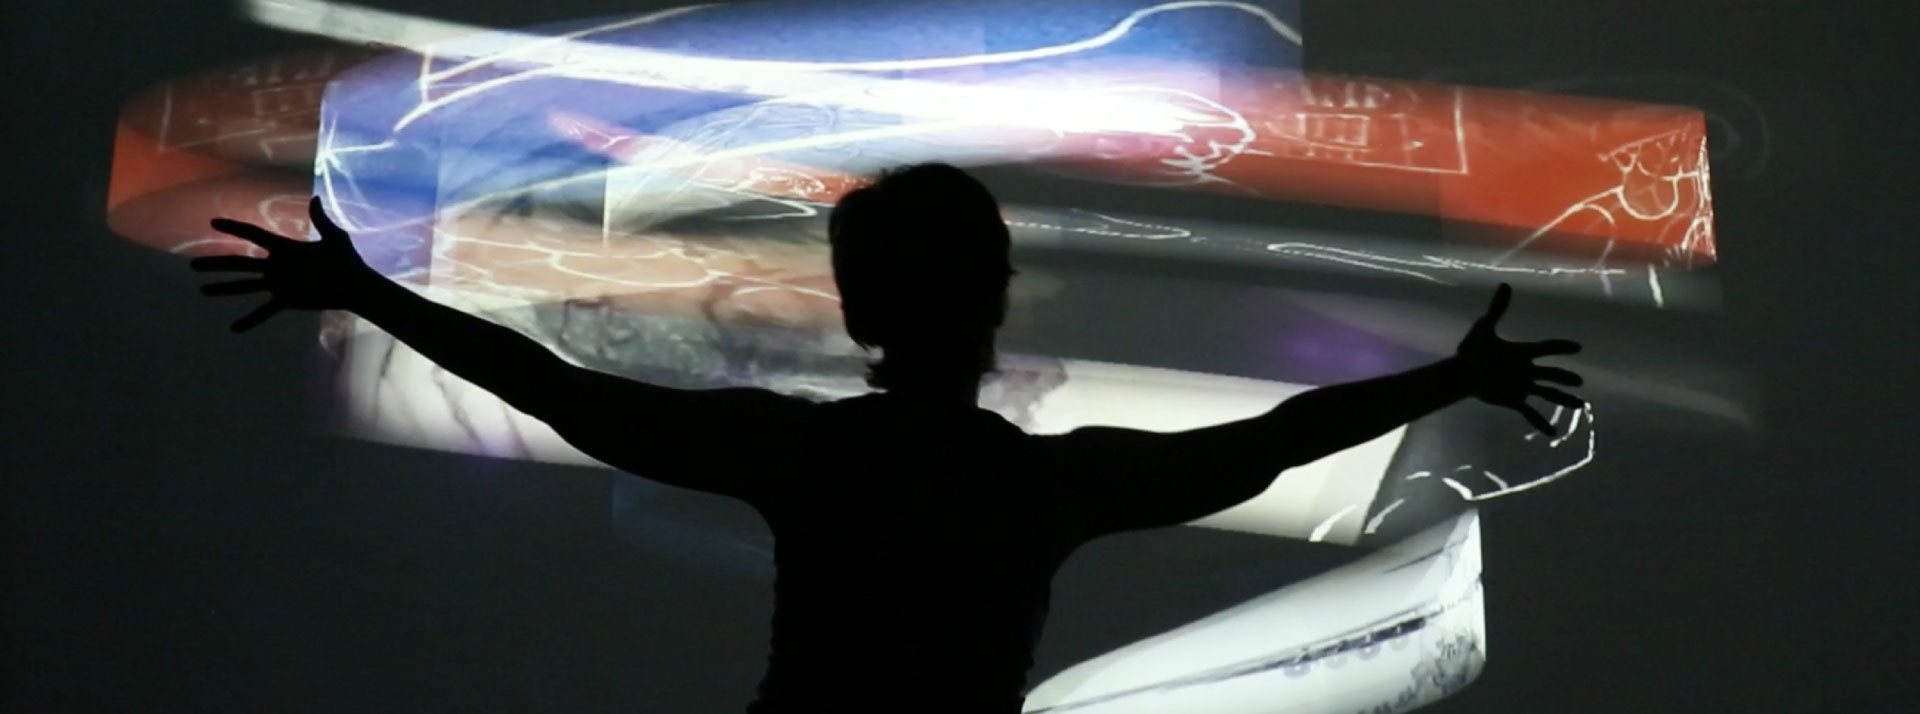 Person in front of digital projection of abstract shapes created by light blurring.